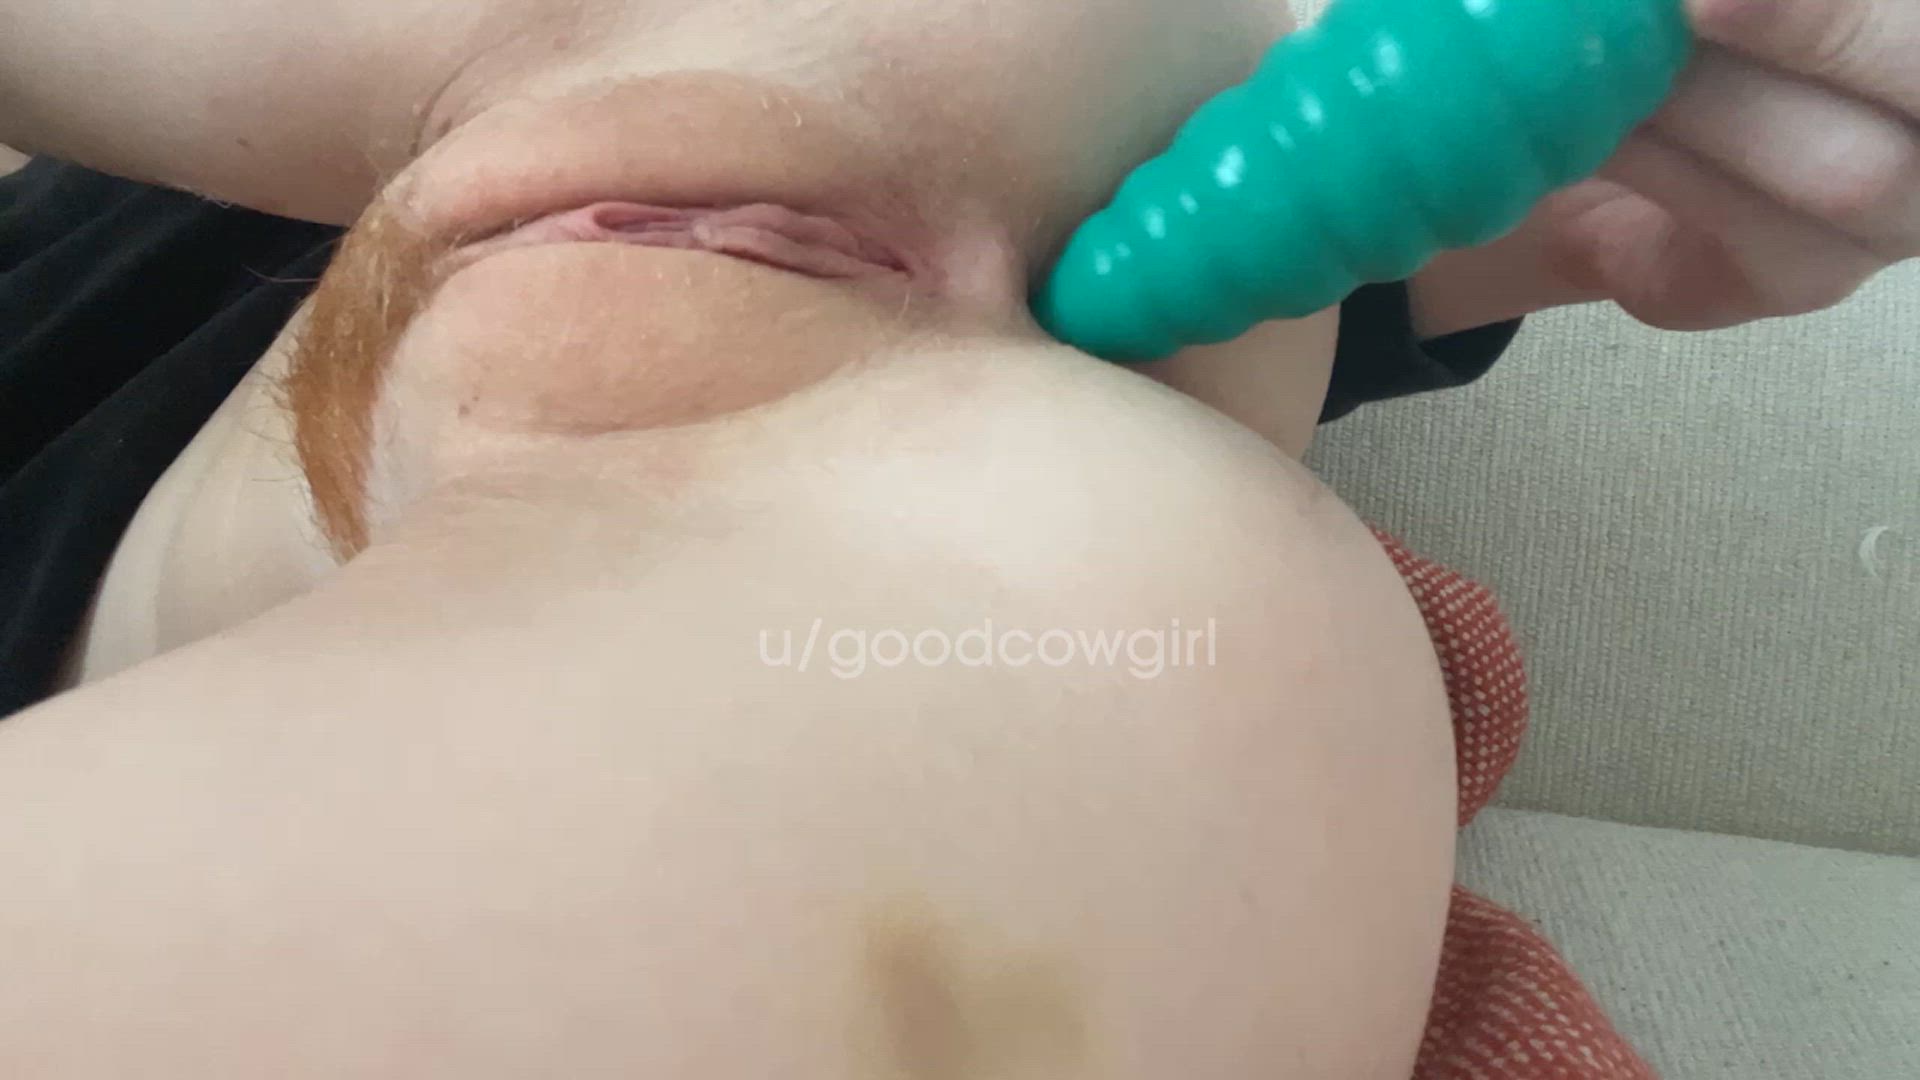 Amateur porn video with onlyfans model goodcowgirl <strong>@goodcowgirl</strong>